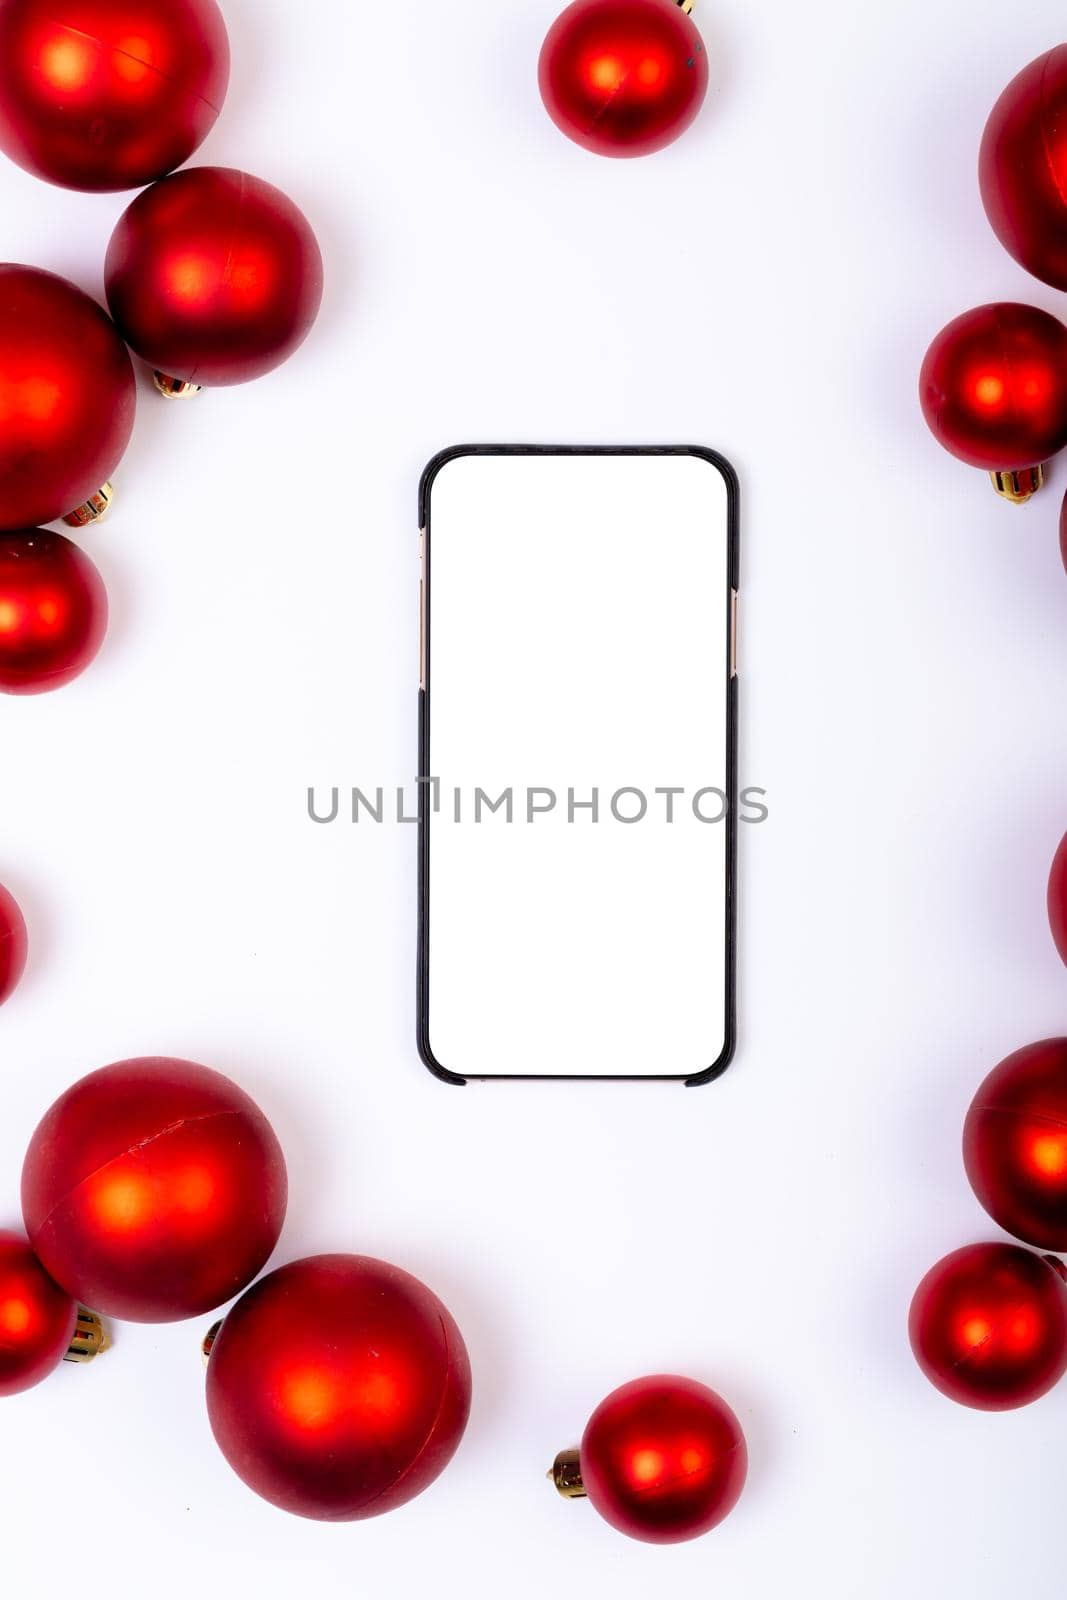 Composition of smartphone with copy space and red baubles on white background by Wavebreakmedia